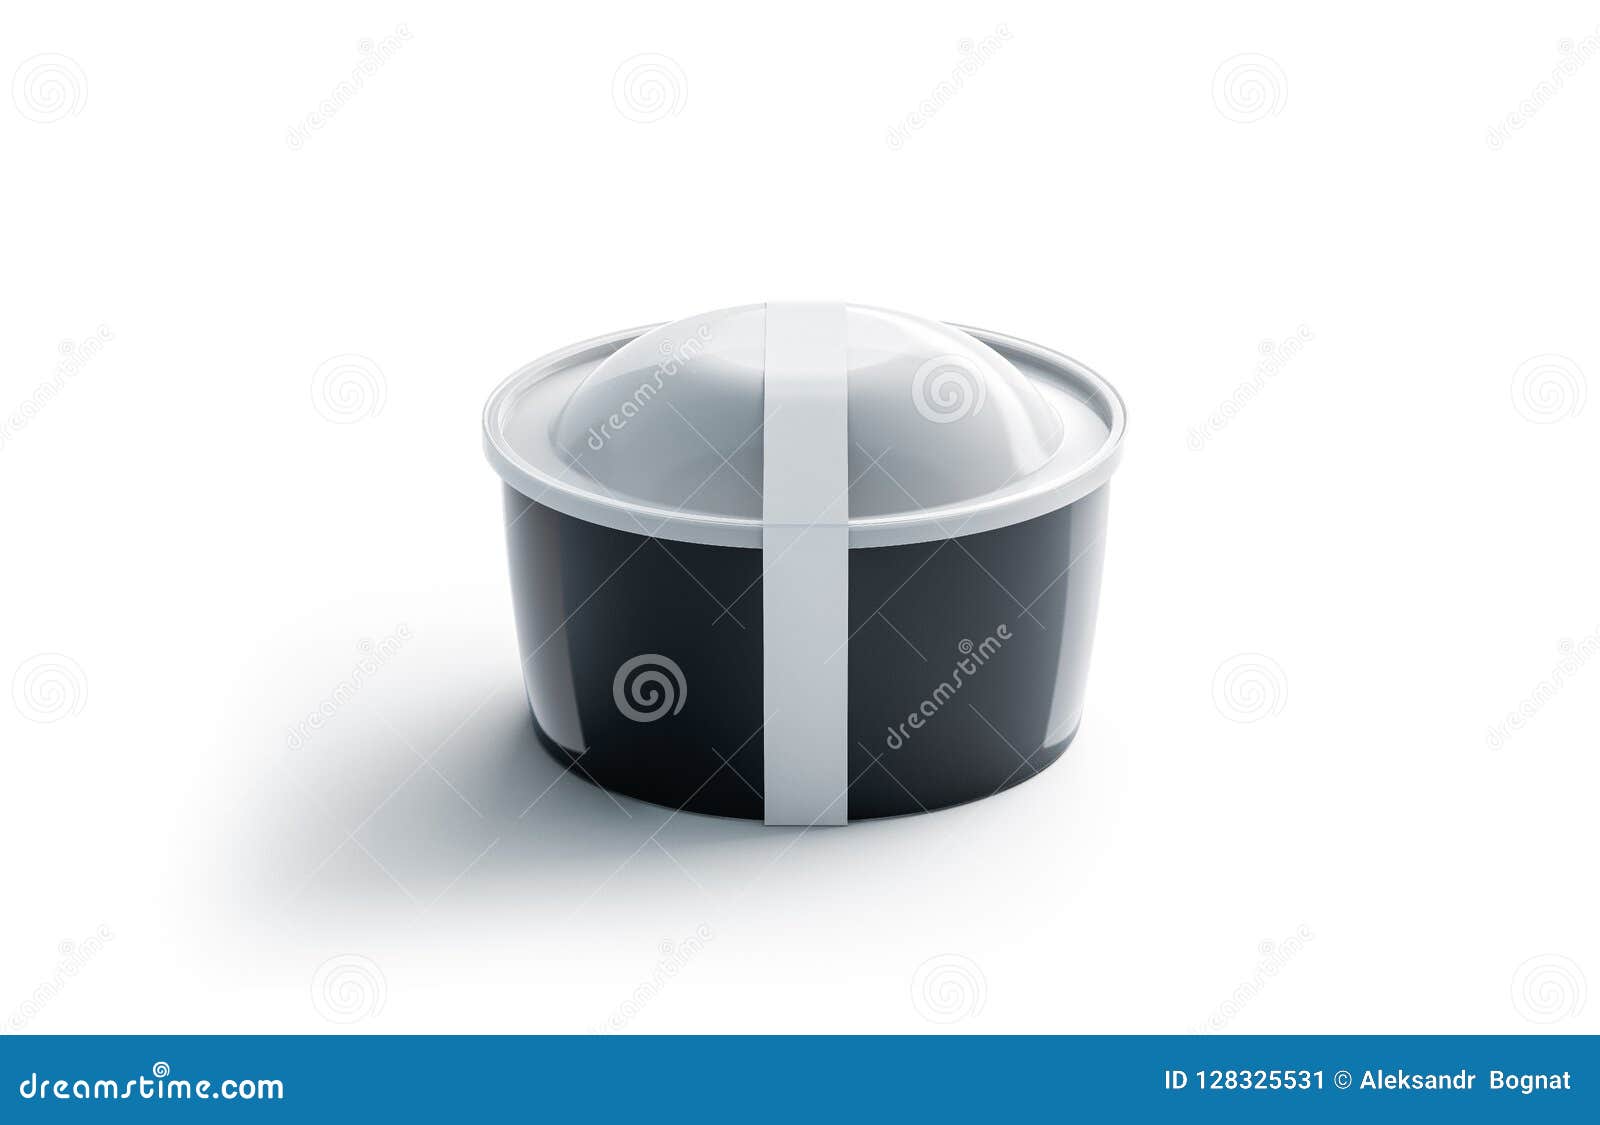 Download Blank Black Round Disposable Container With White Label ...